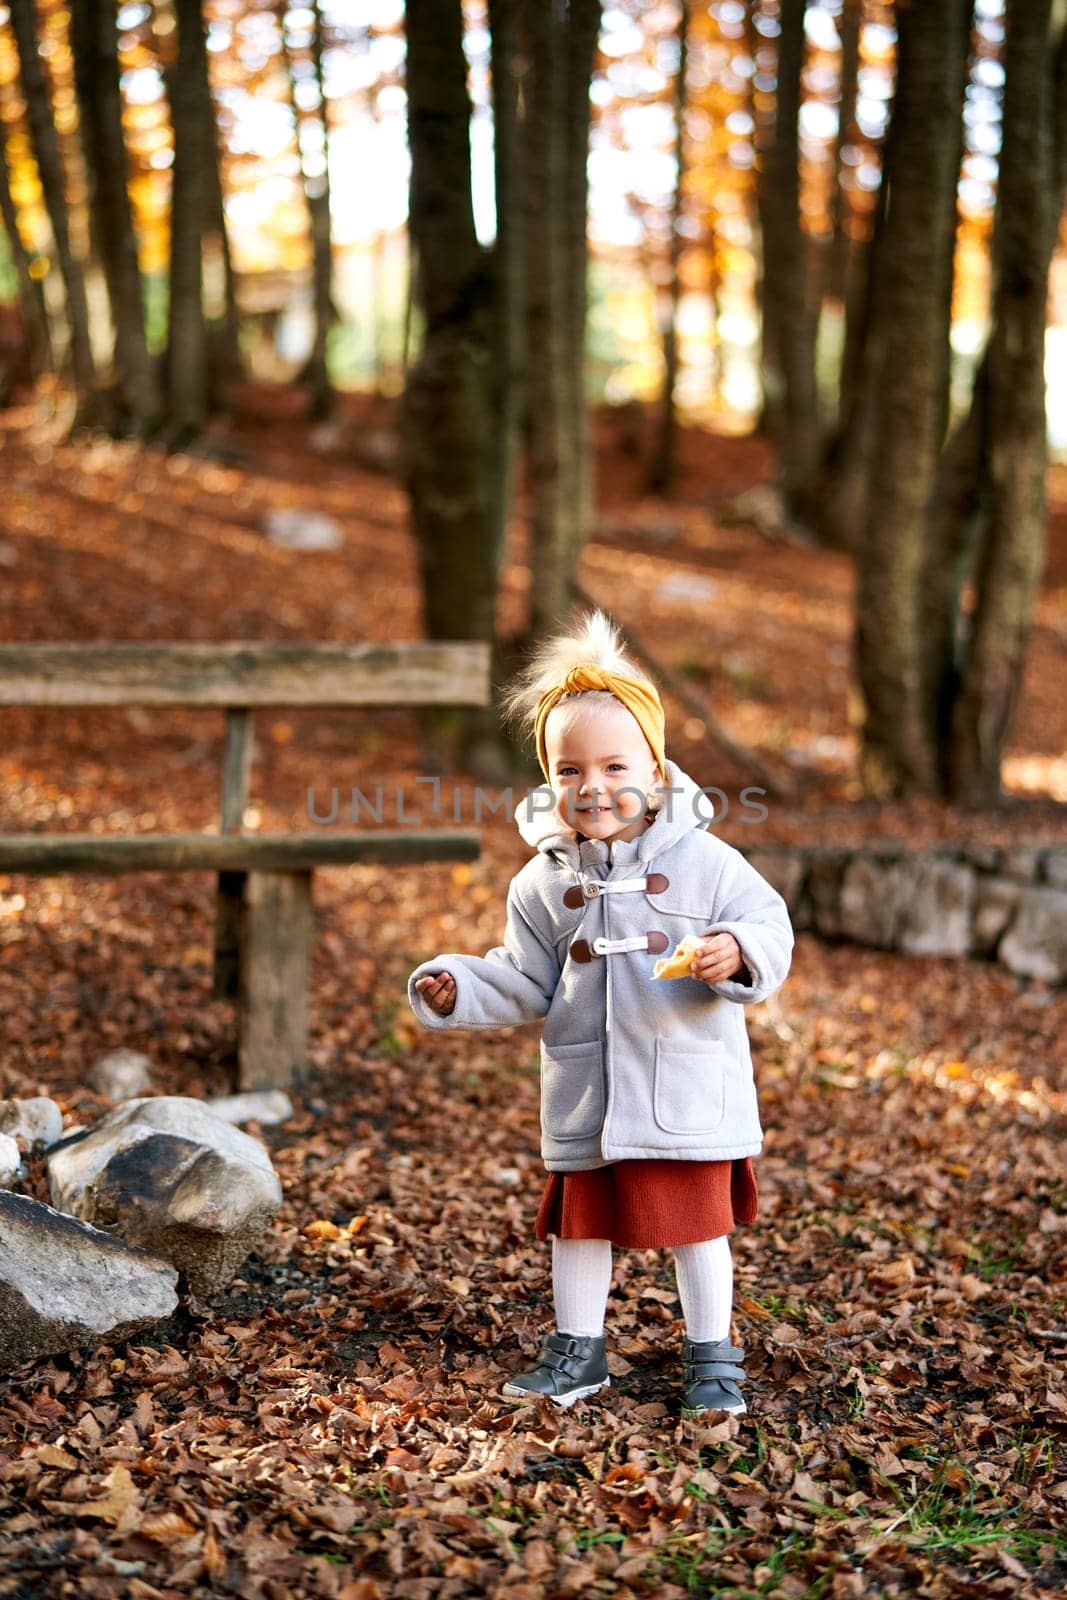 Little girl with a bun in her hand stands on fallen leaves near a park bench. High quality photo